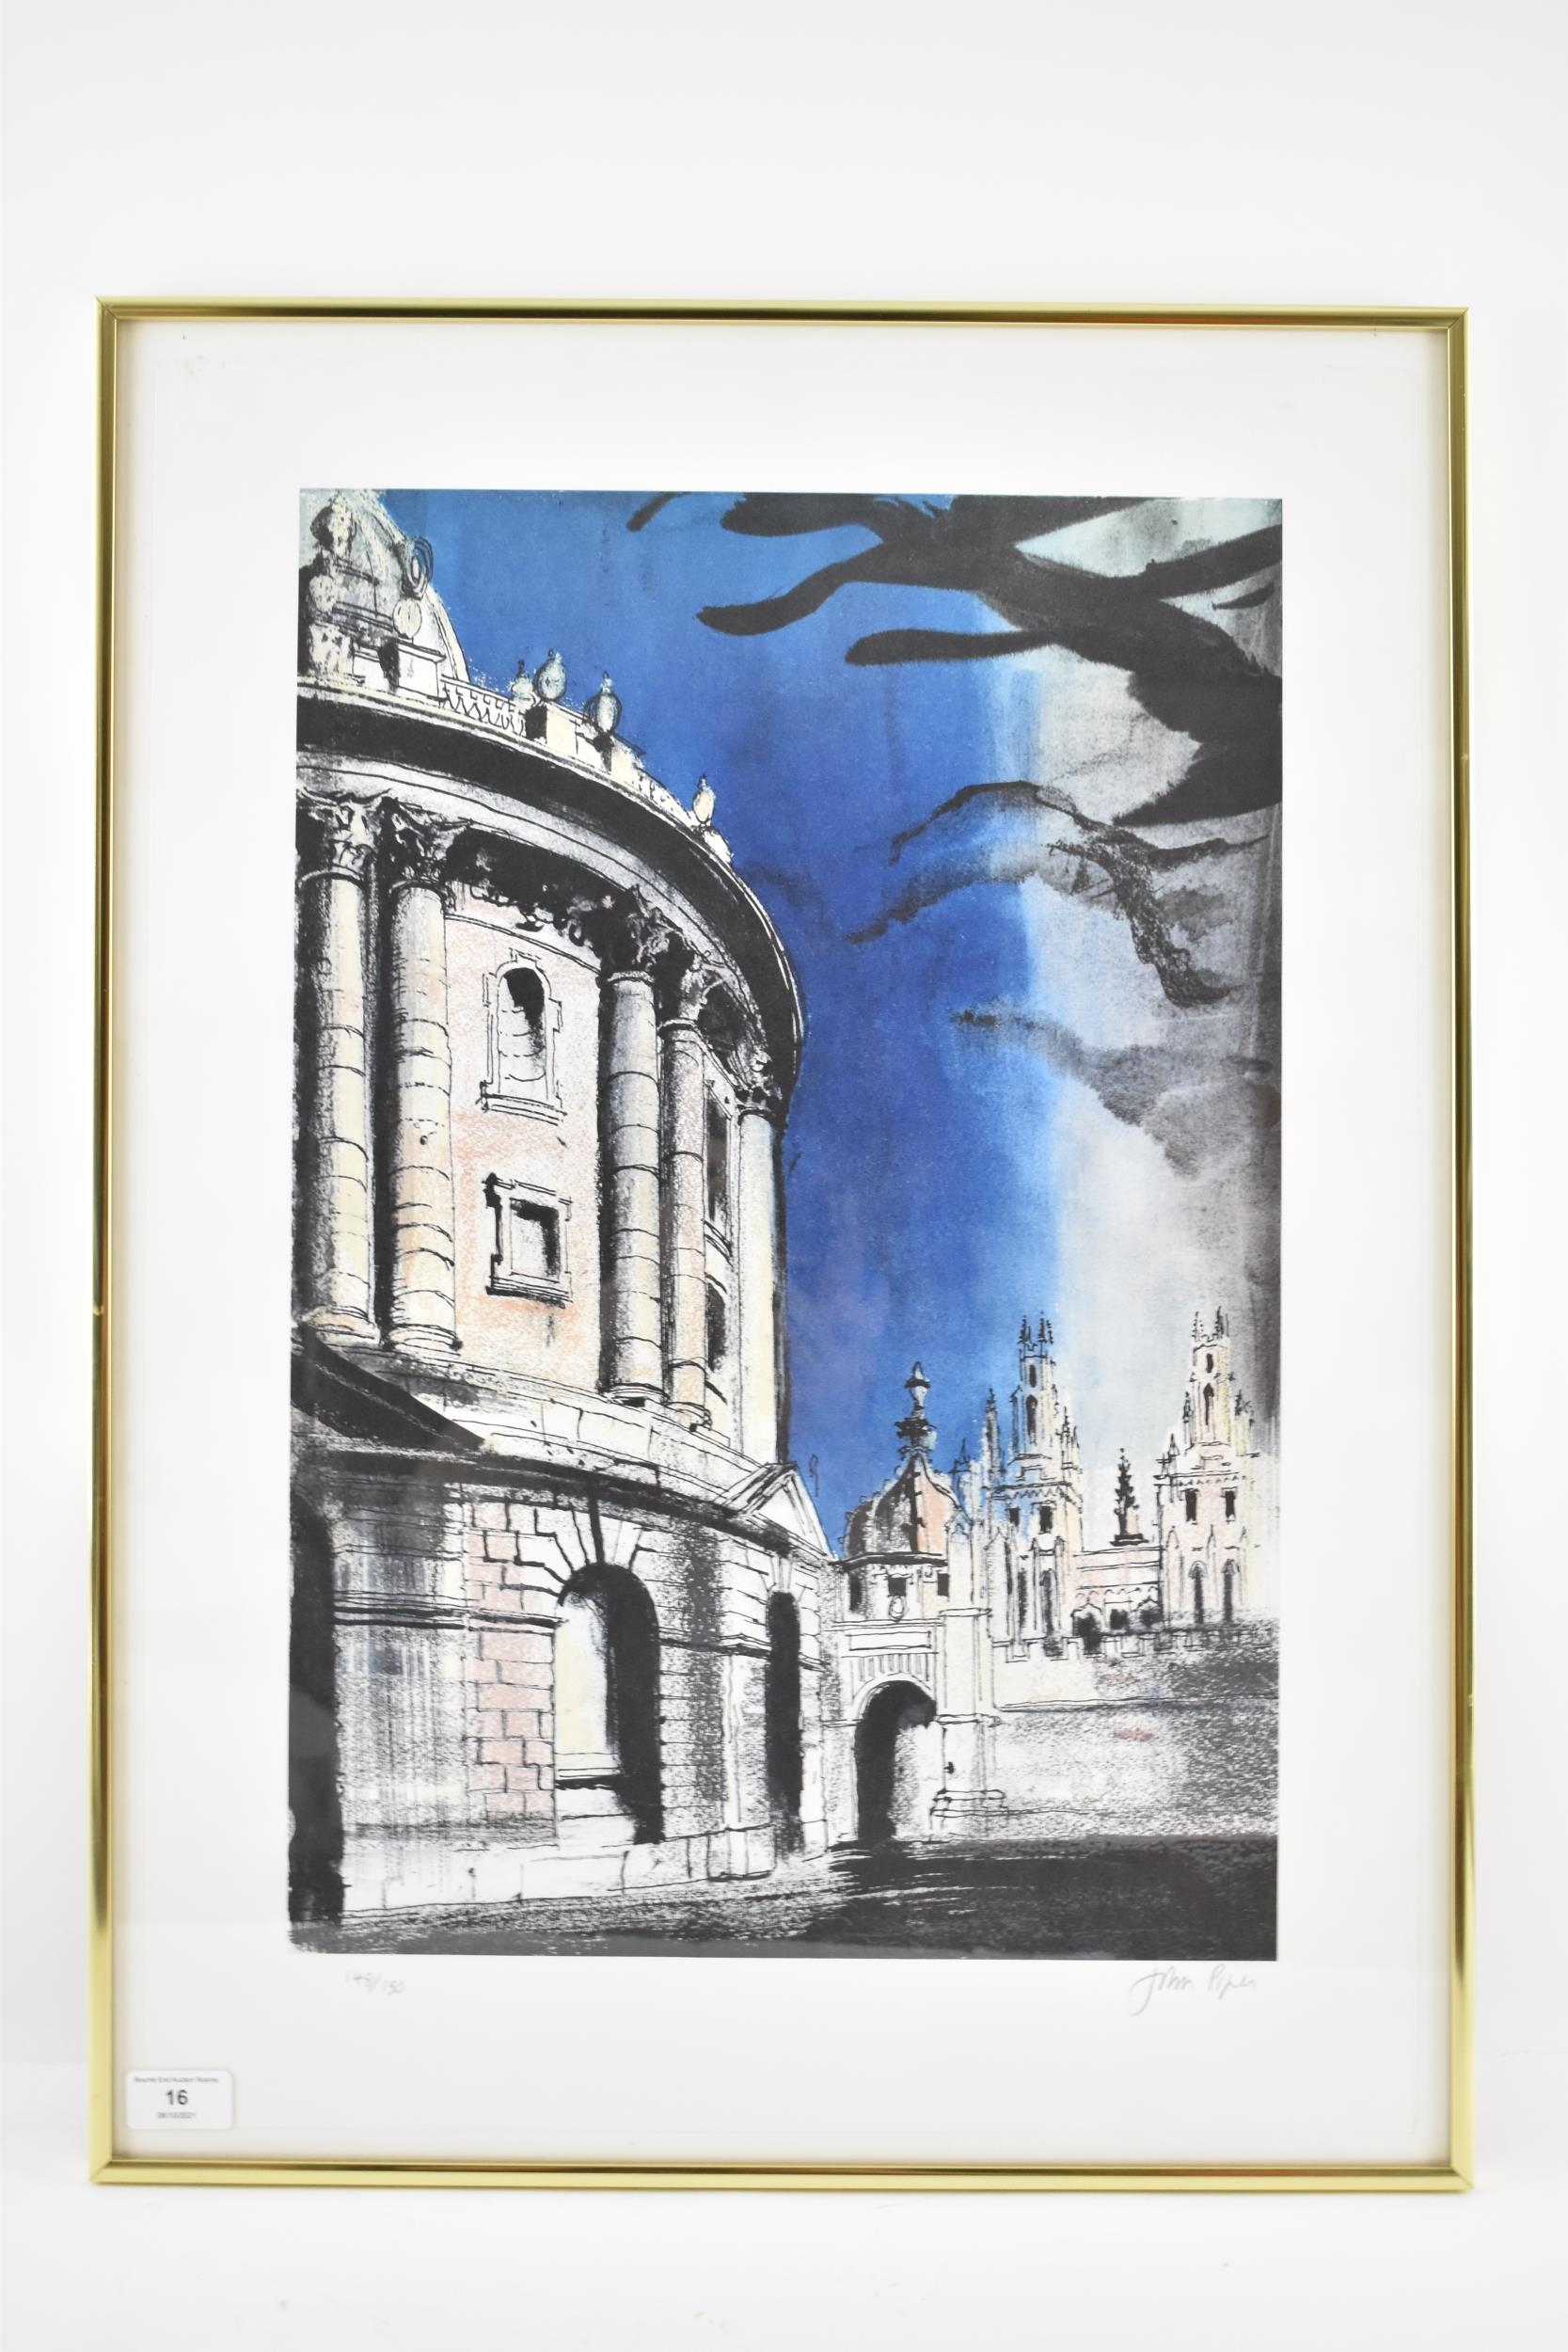 John Piper (1903-1992) Radcliffe Camera, limited edition lithograph, signed and numbered 148/150 - Image 4 of 4